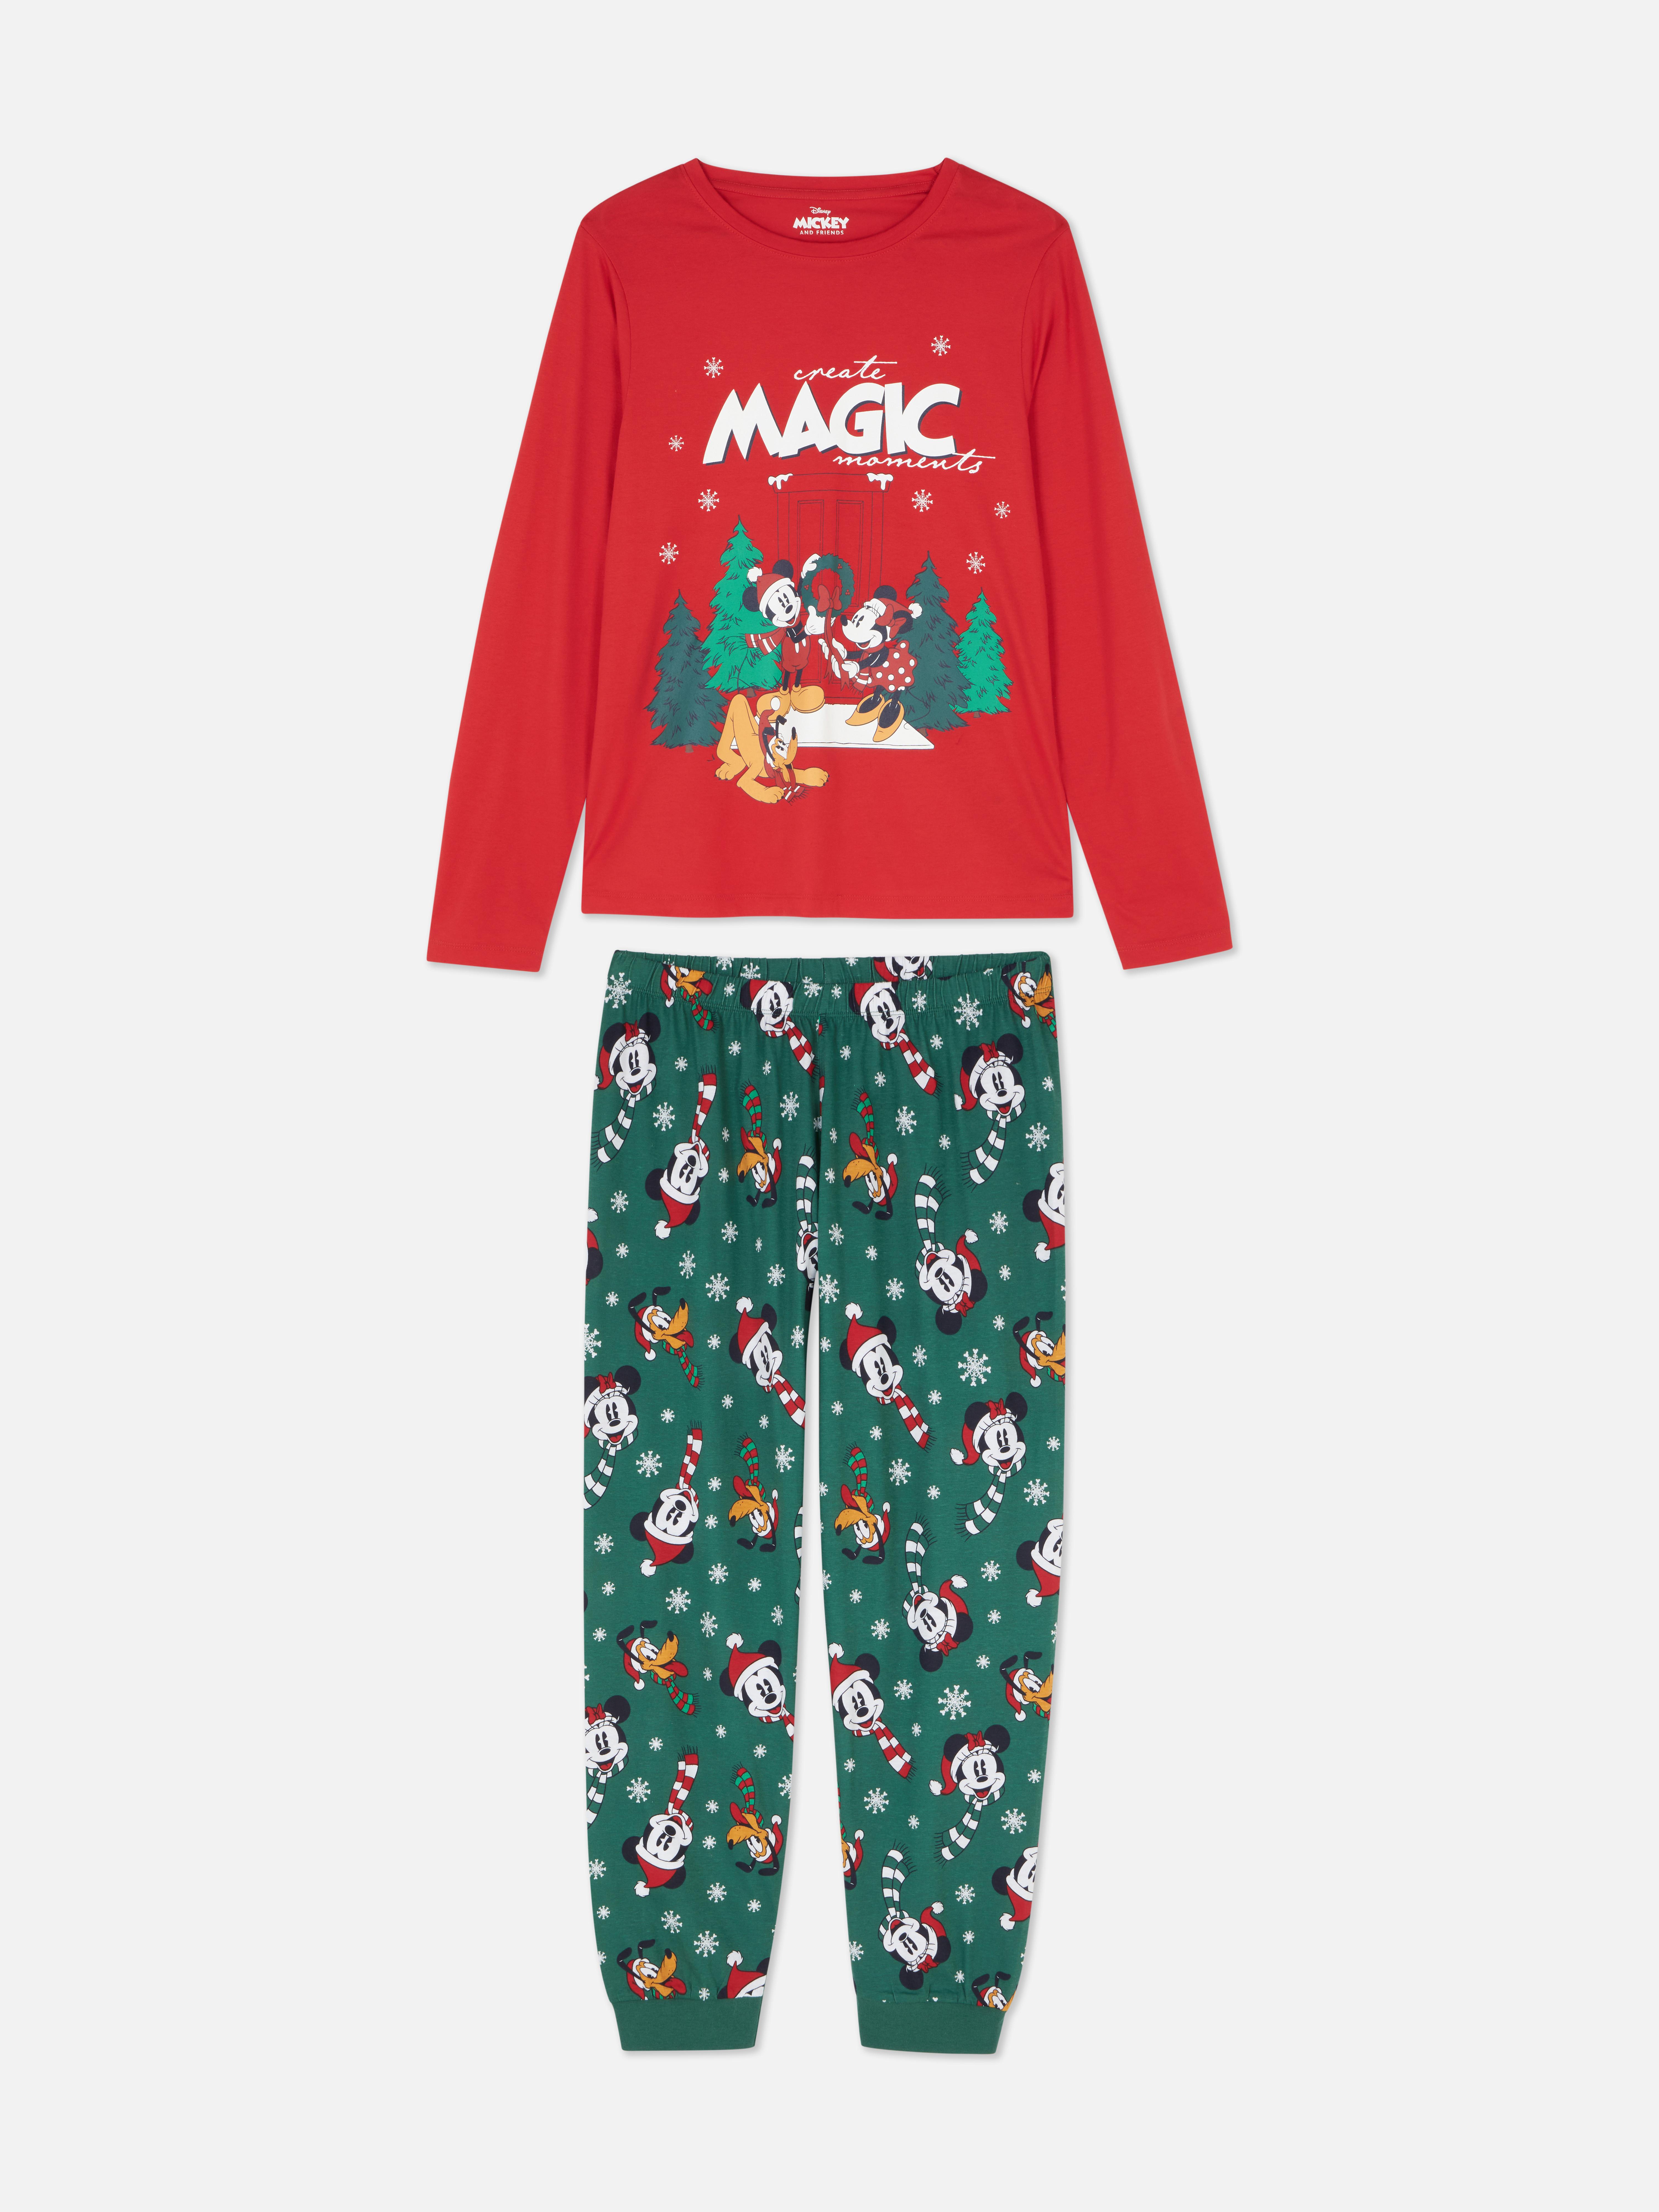 Women's Disney’s Mickey Mouse and Friends Christmas Family Pajamas